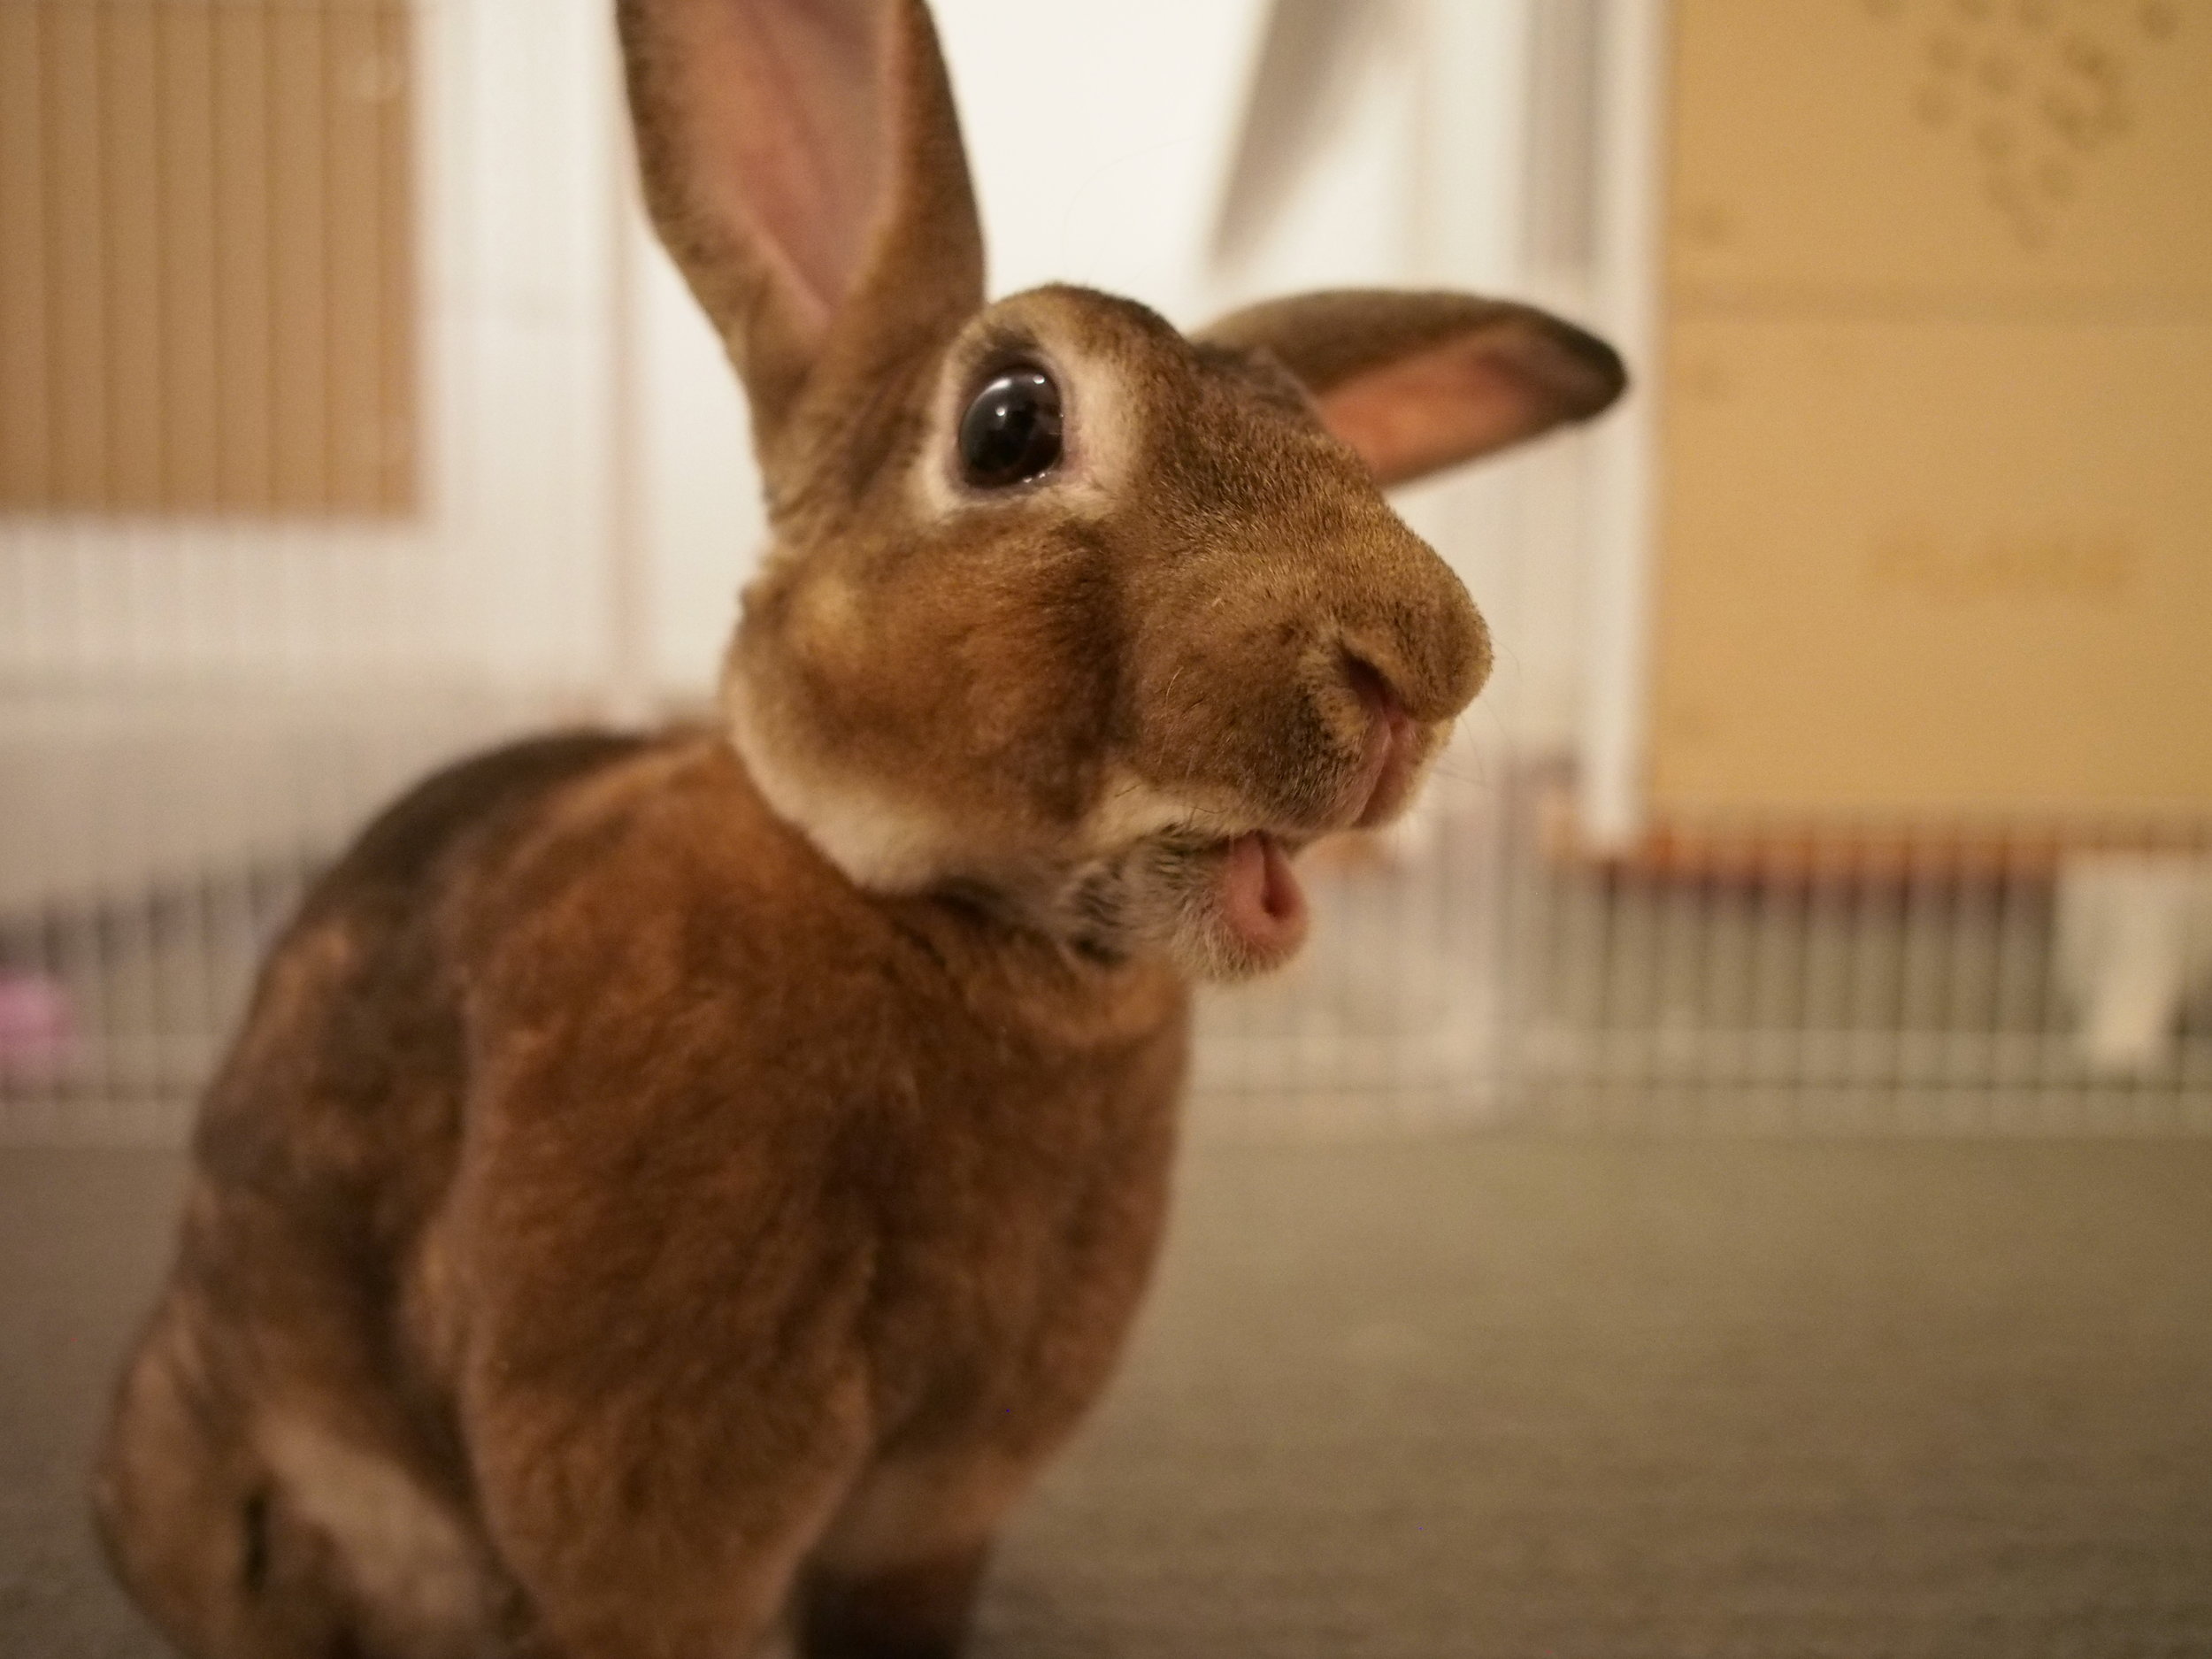 Bunny Gives an Impassioned and Convincing Speech on the Importance of Treats